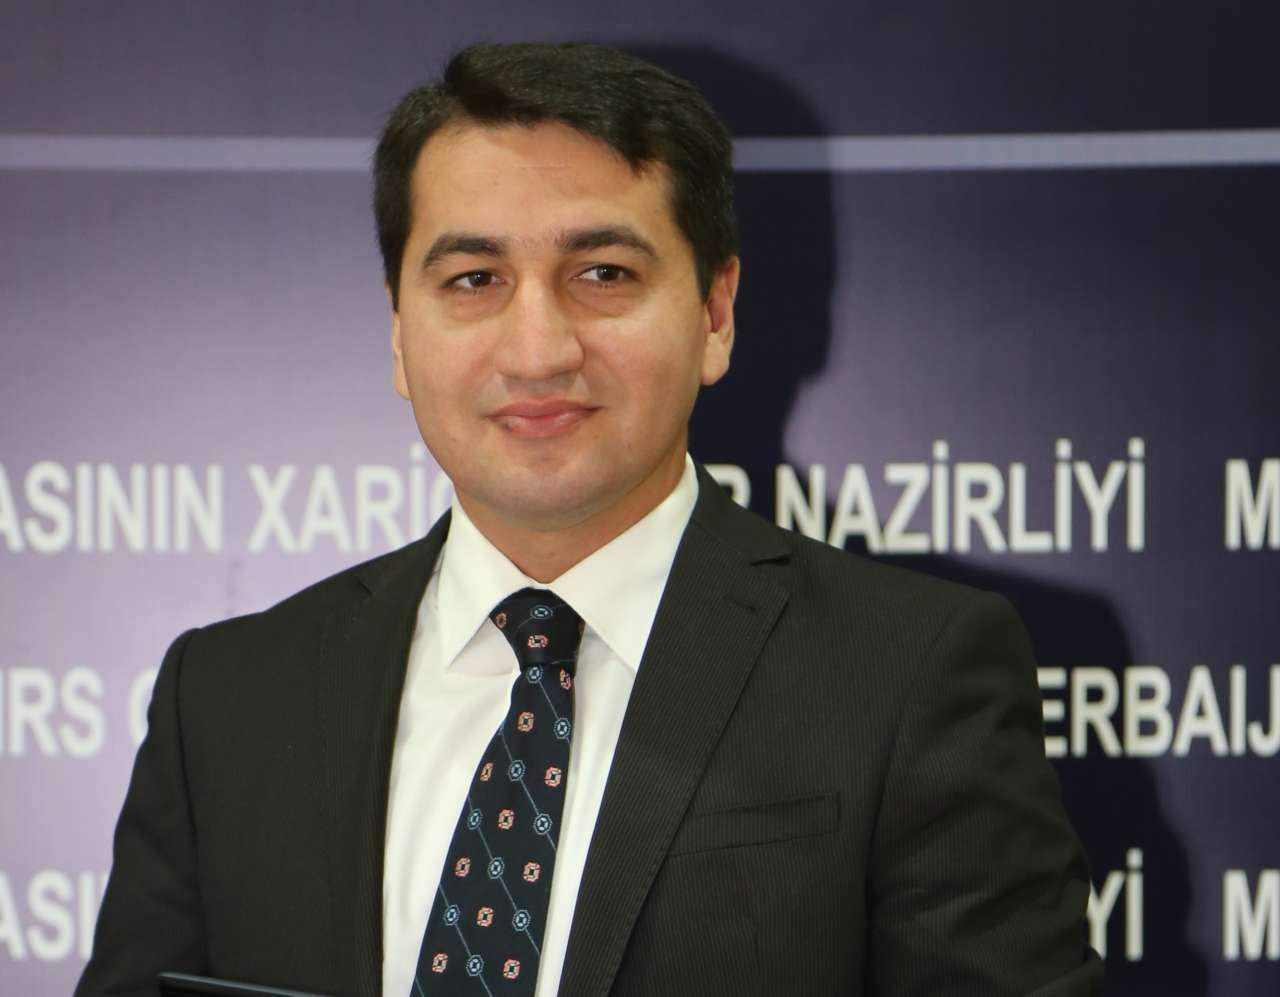 Everyone must know that Azerbaijan's patience has its limits - Foreign Ministry